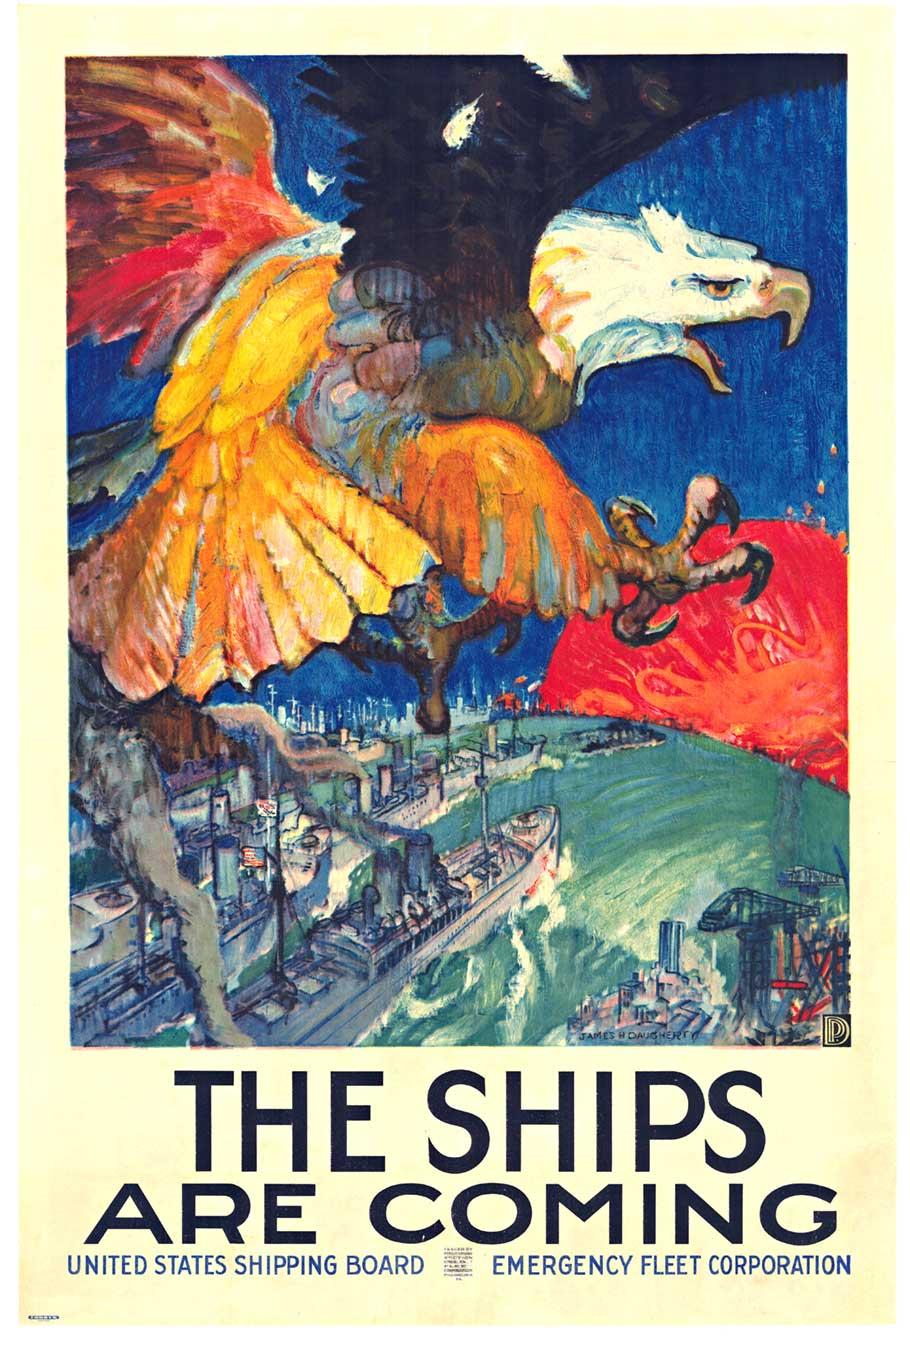 James Henry Daugherty Landscape Print - Original "The Ships Are Coming" vintage American poster with an Eagle.